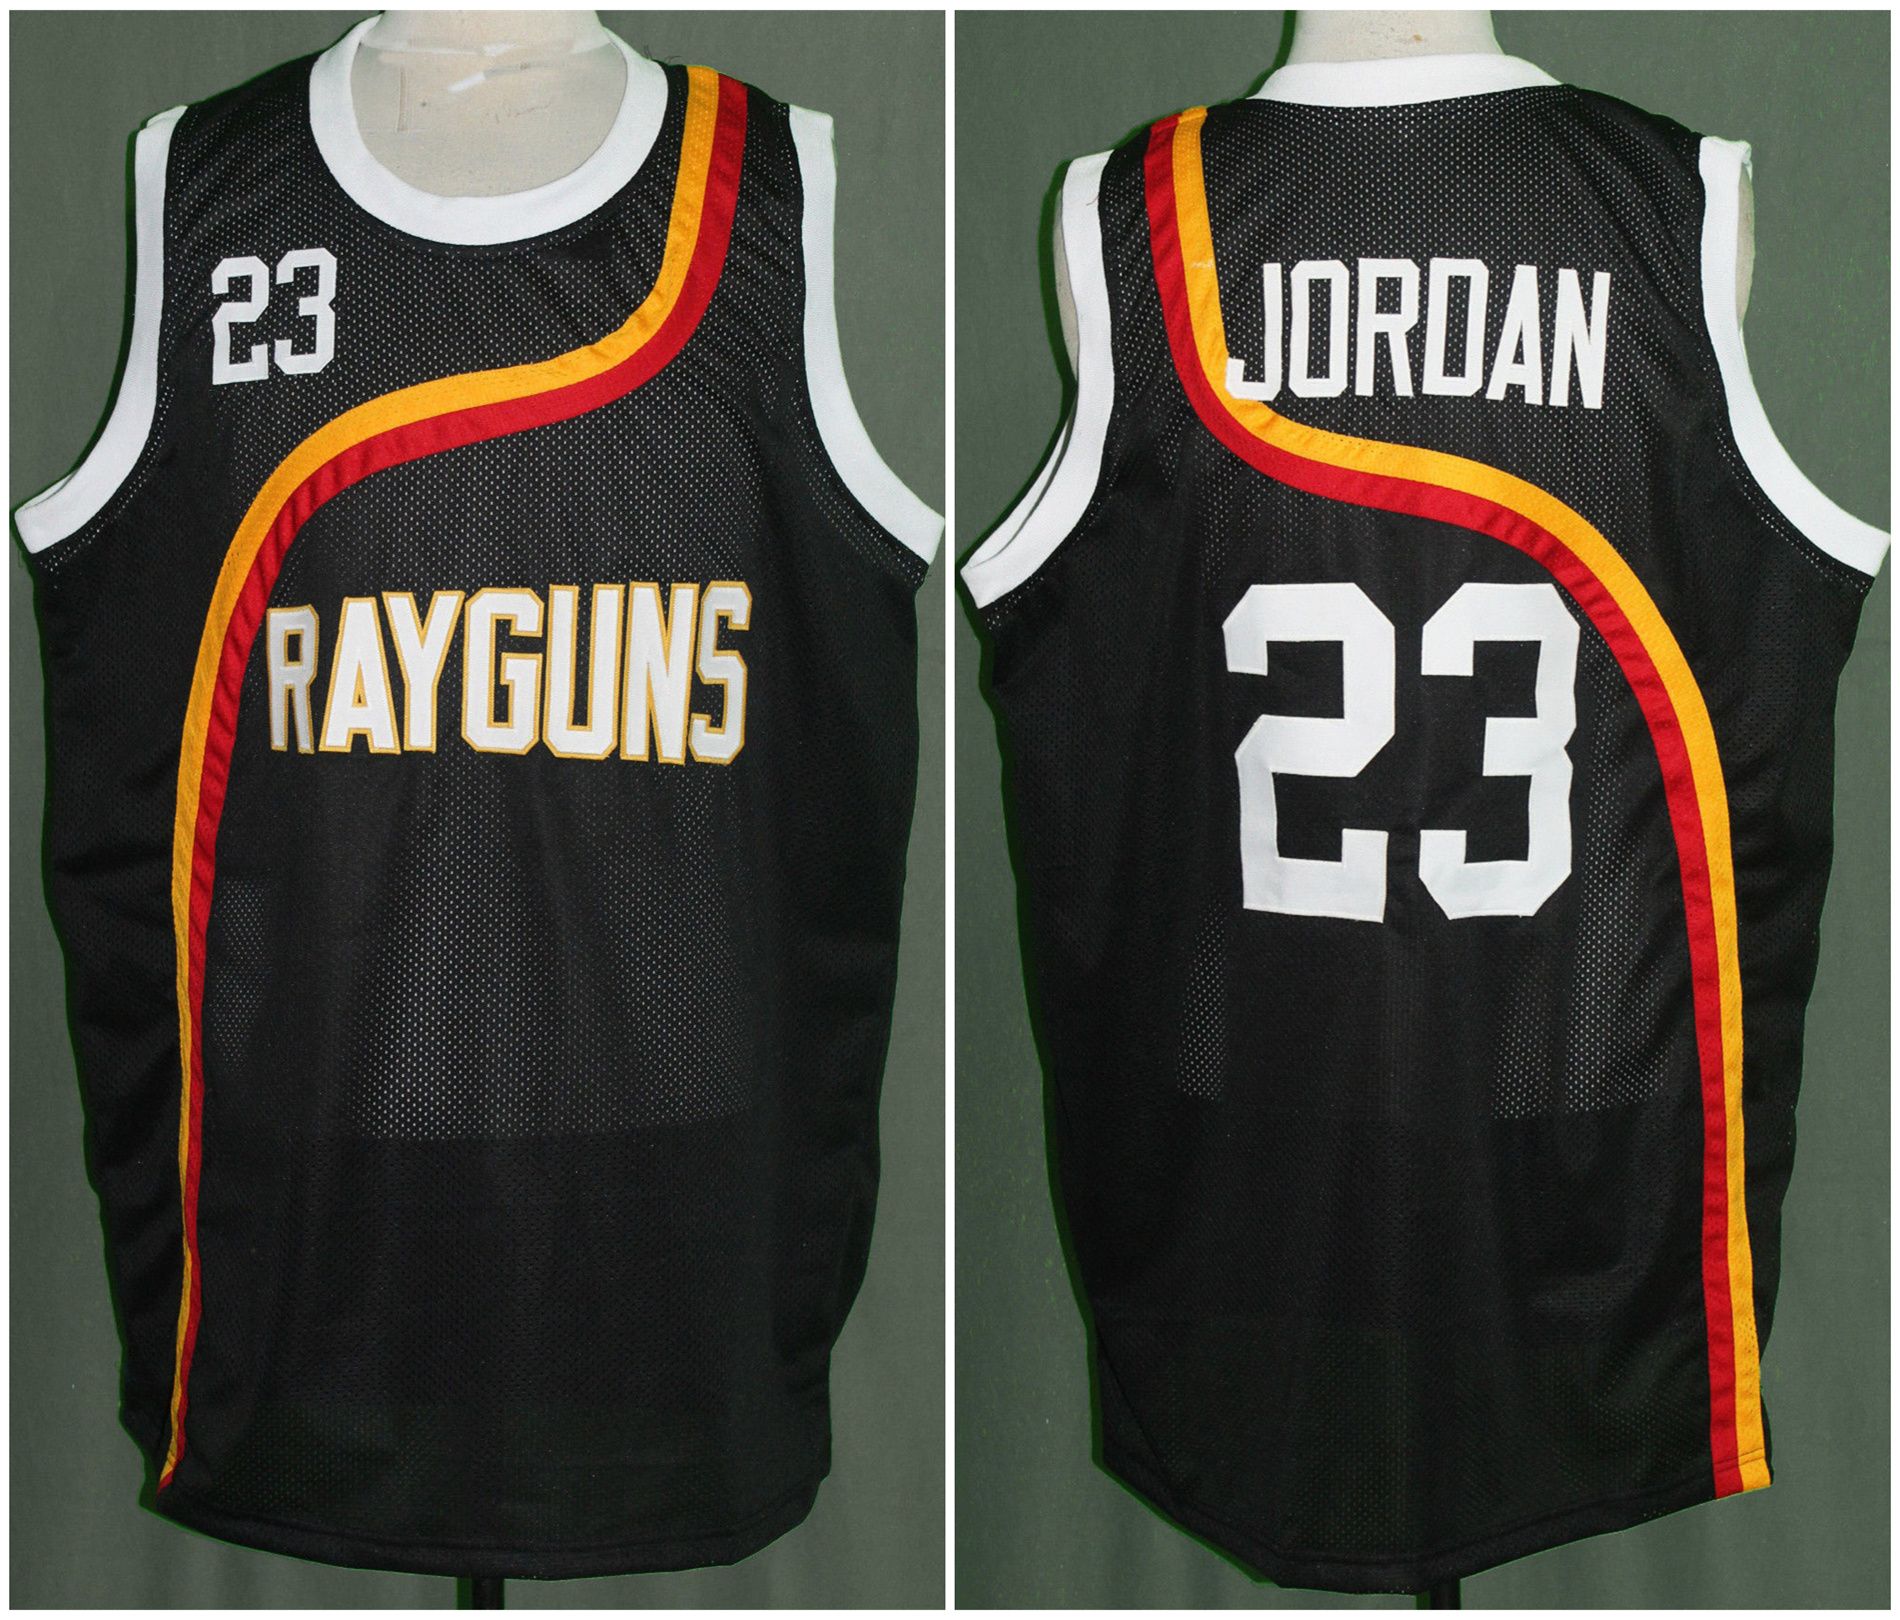 roswell rayguns jersey